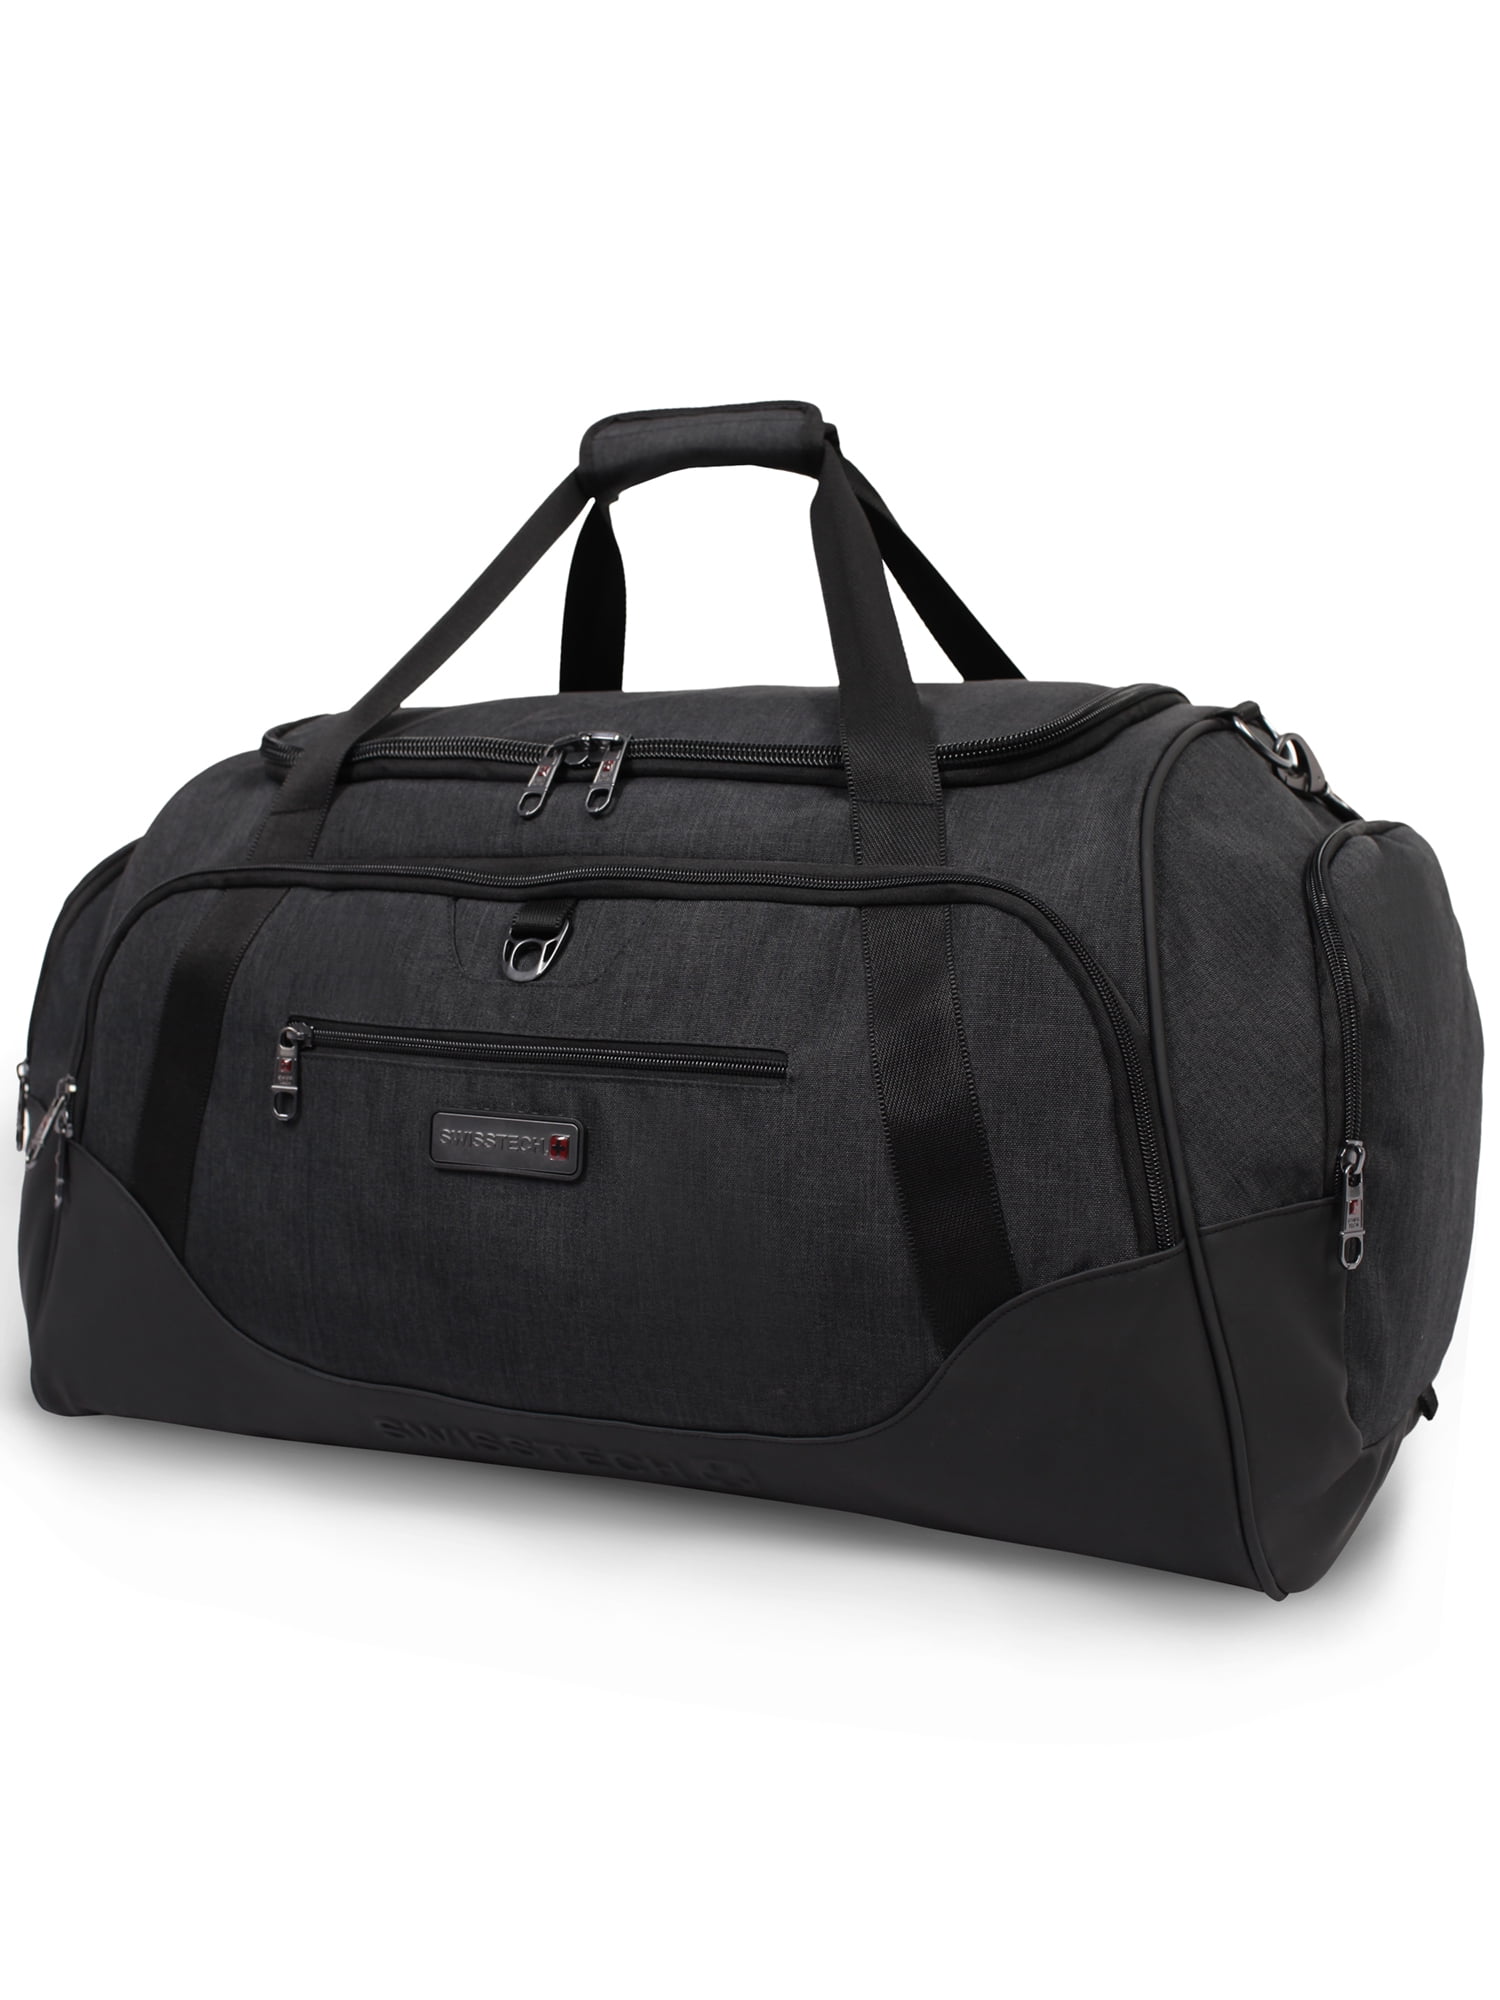 Buy CTS 2 in 1 Convertible Duffel for USD 107.99